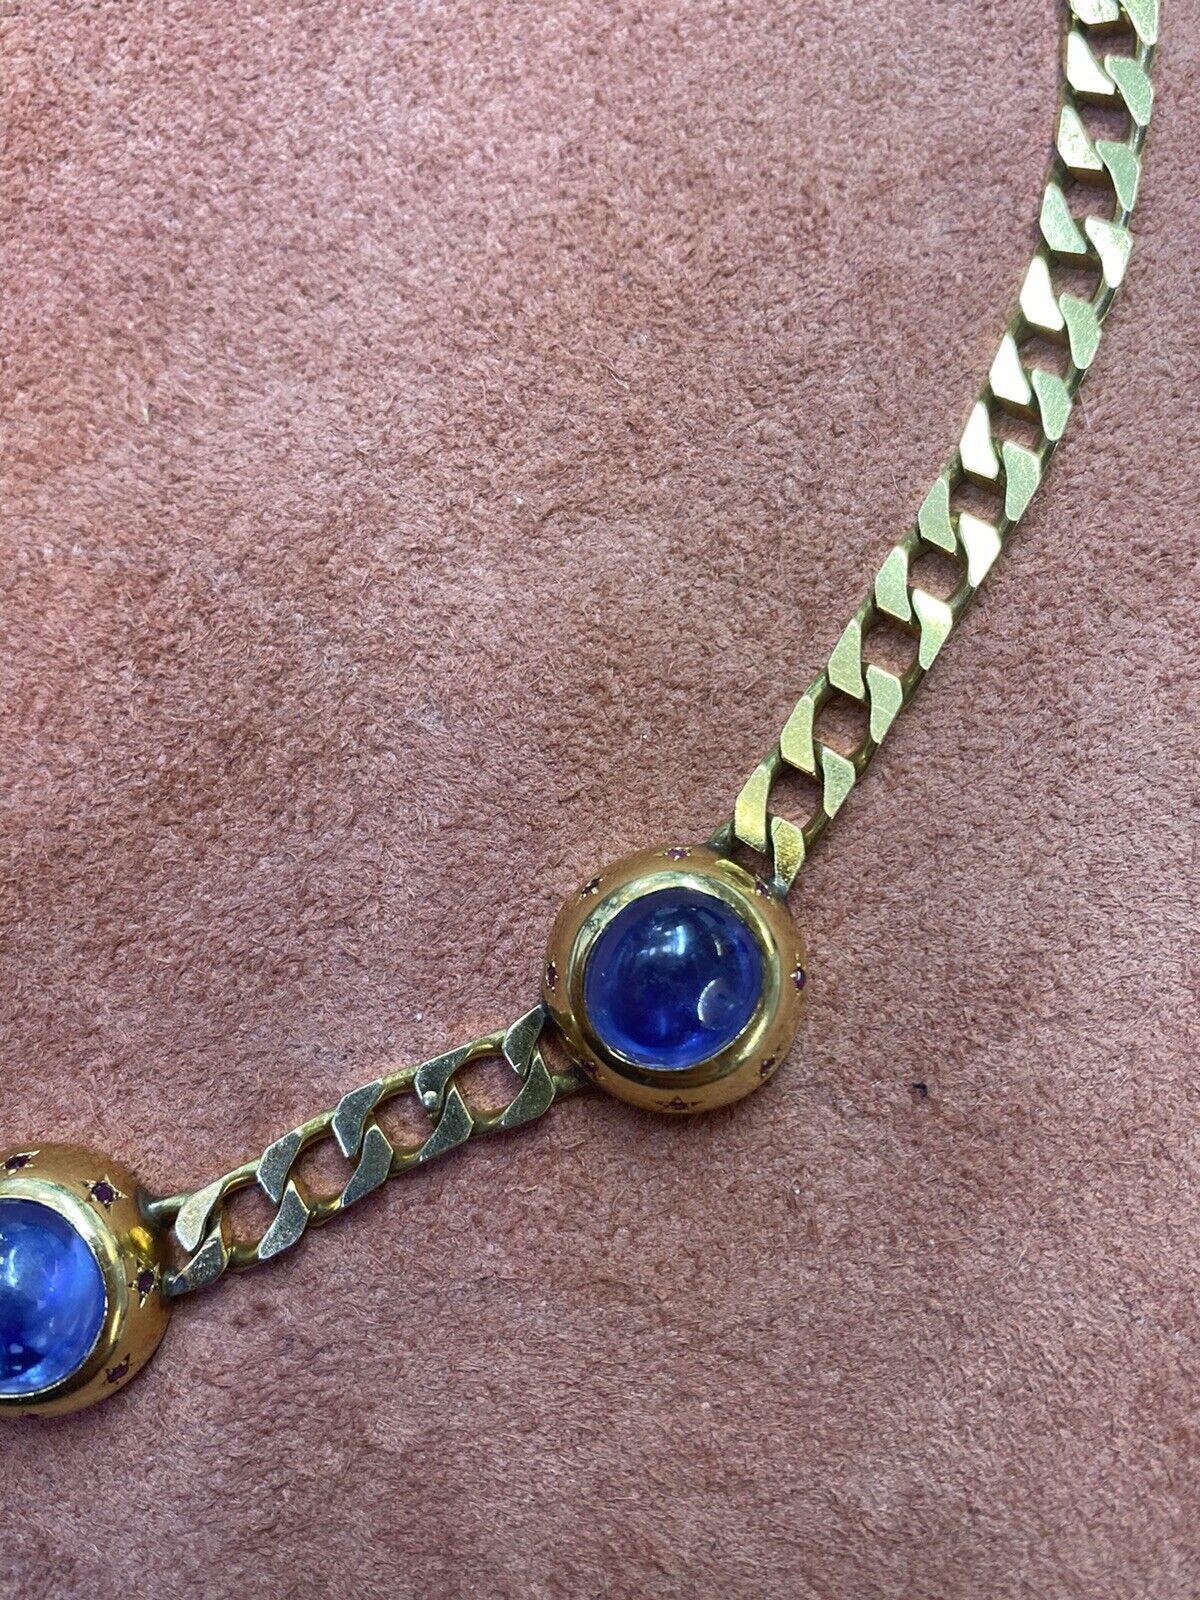 Rare Bvlgari Cabochon Sapphire Vintage Necklace In Excellent Condition For Sale In New York, NY